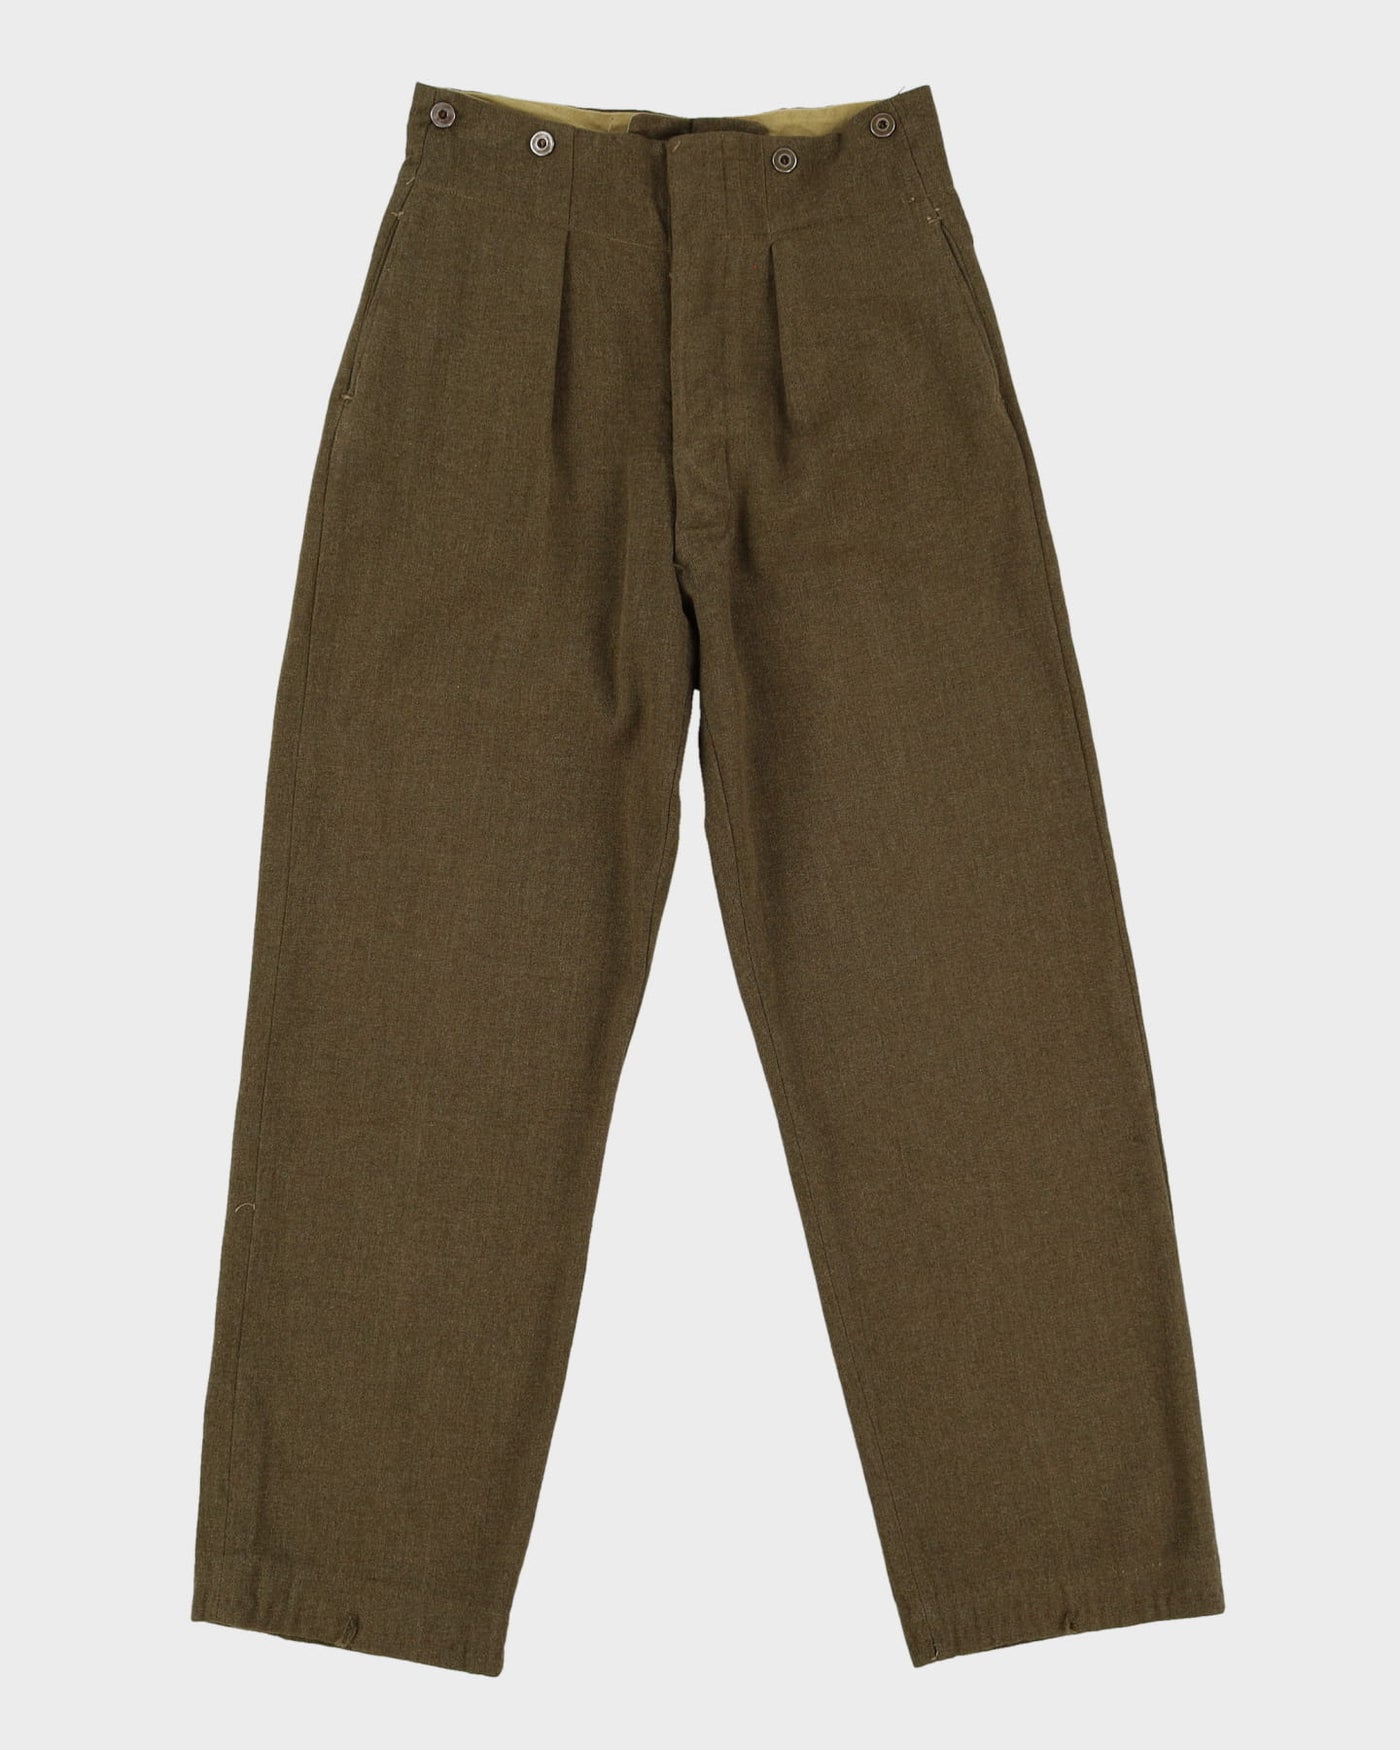 1952 Vintage Canadian Army Cadets Battledress Wool Trousers - 30x30